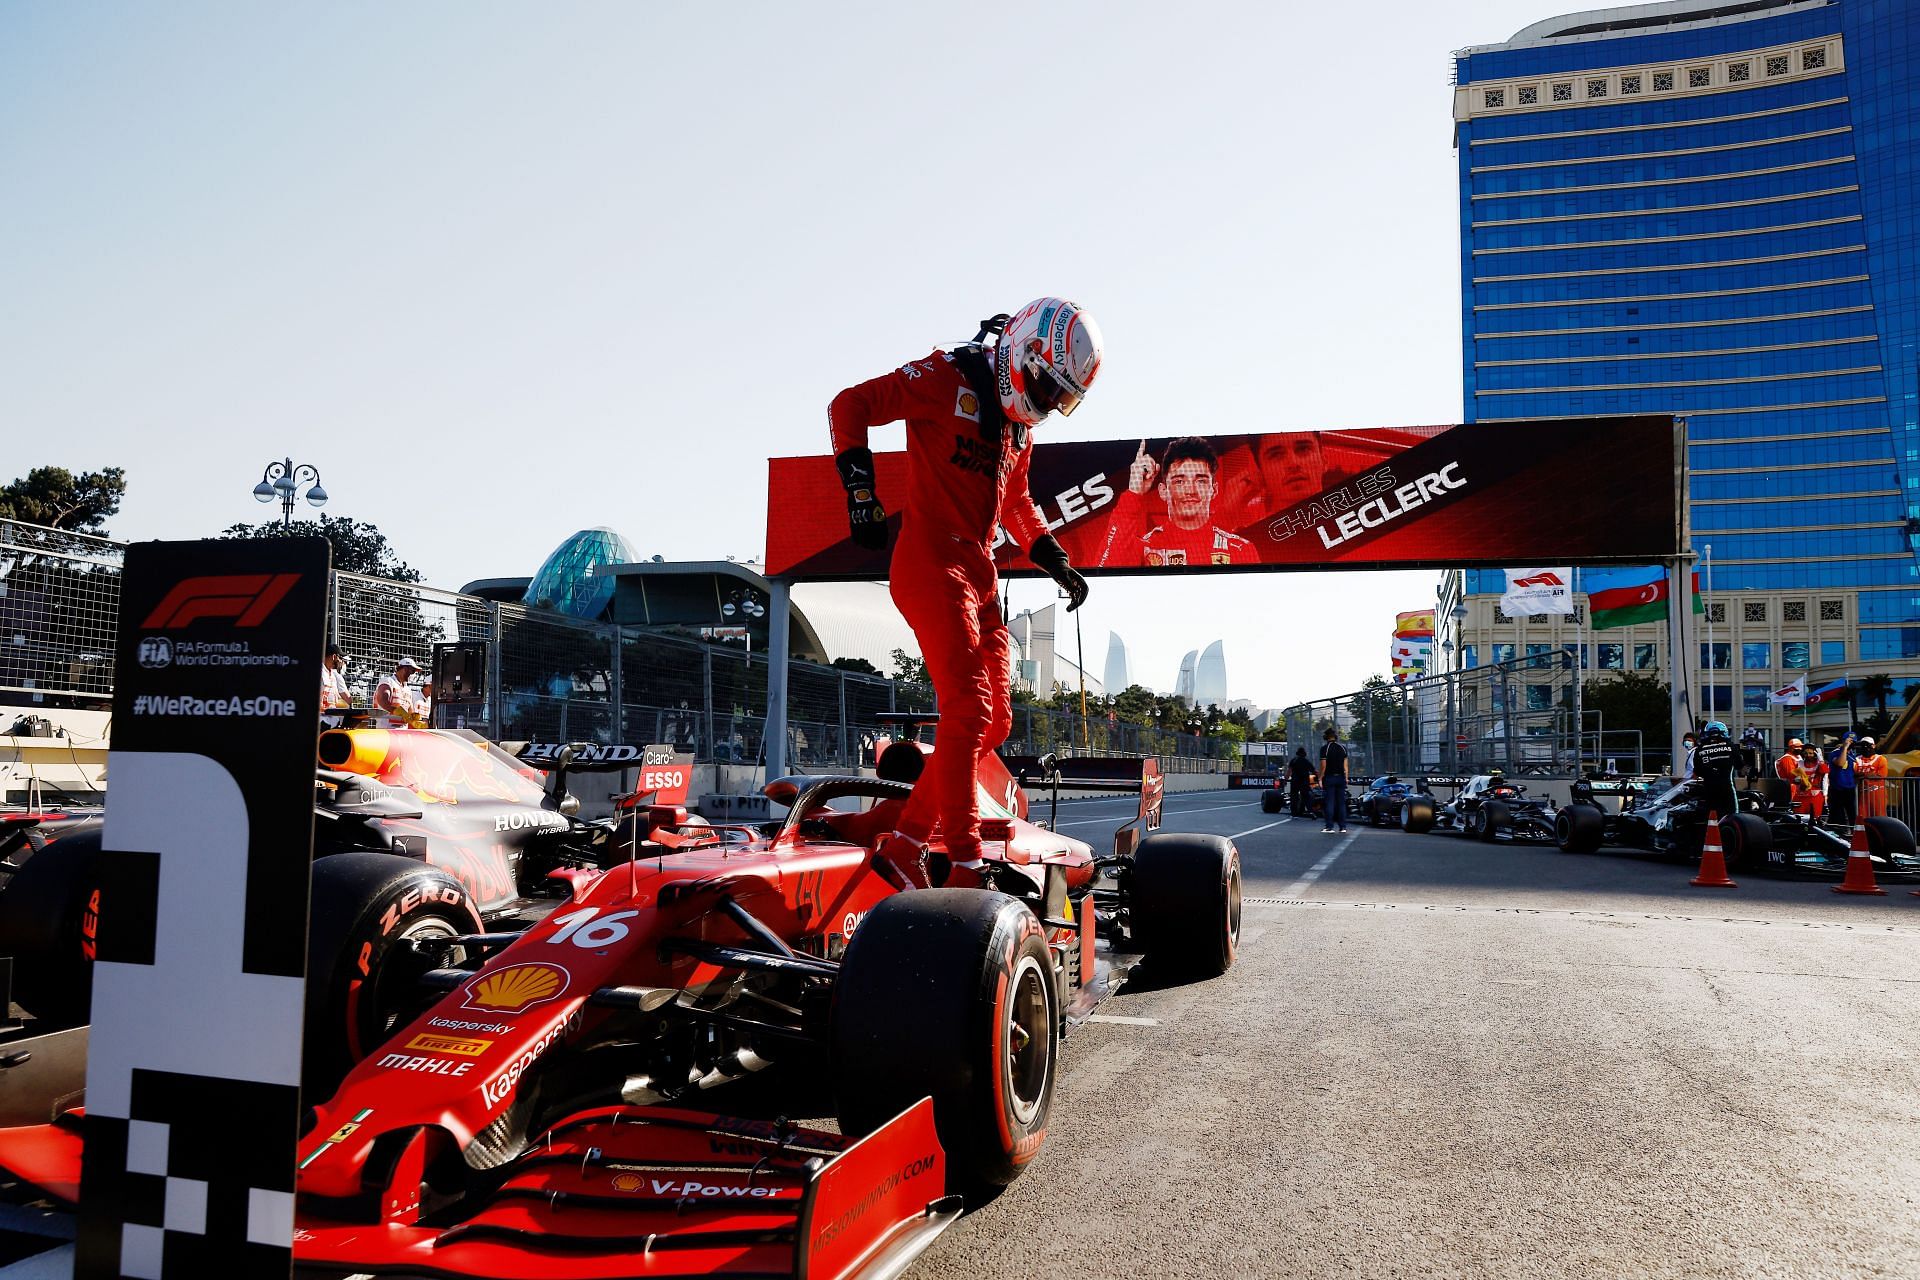 Charles Leclerc secured an improbable pole position at Baku this season